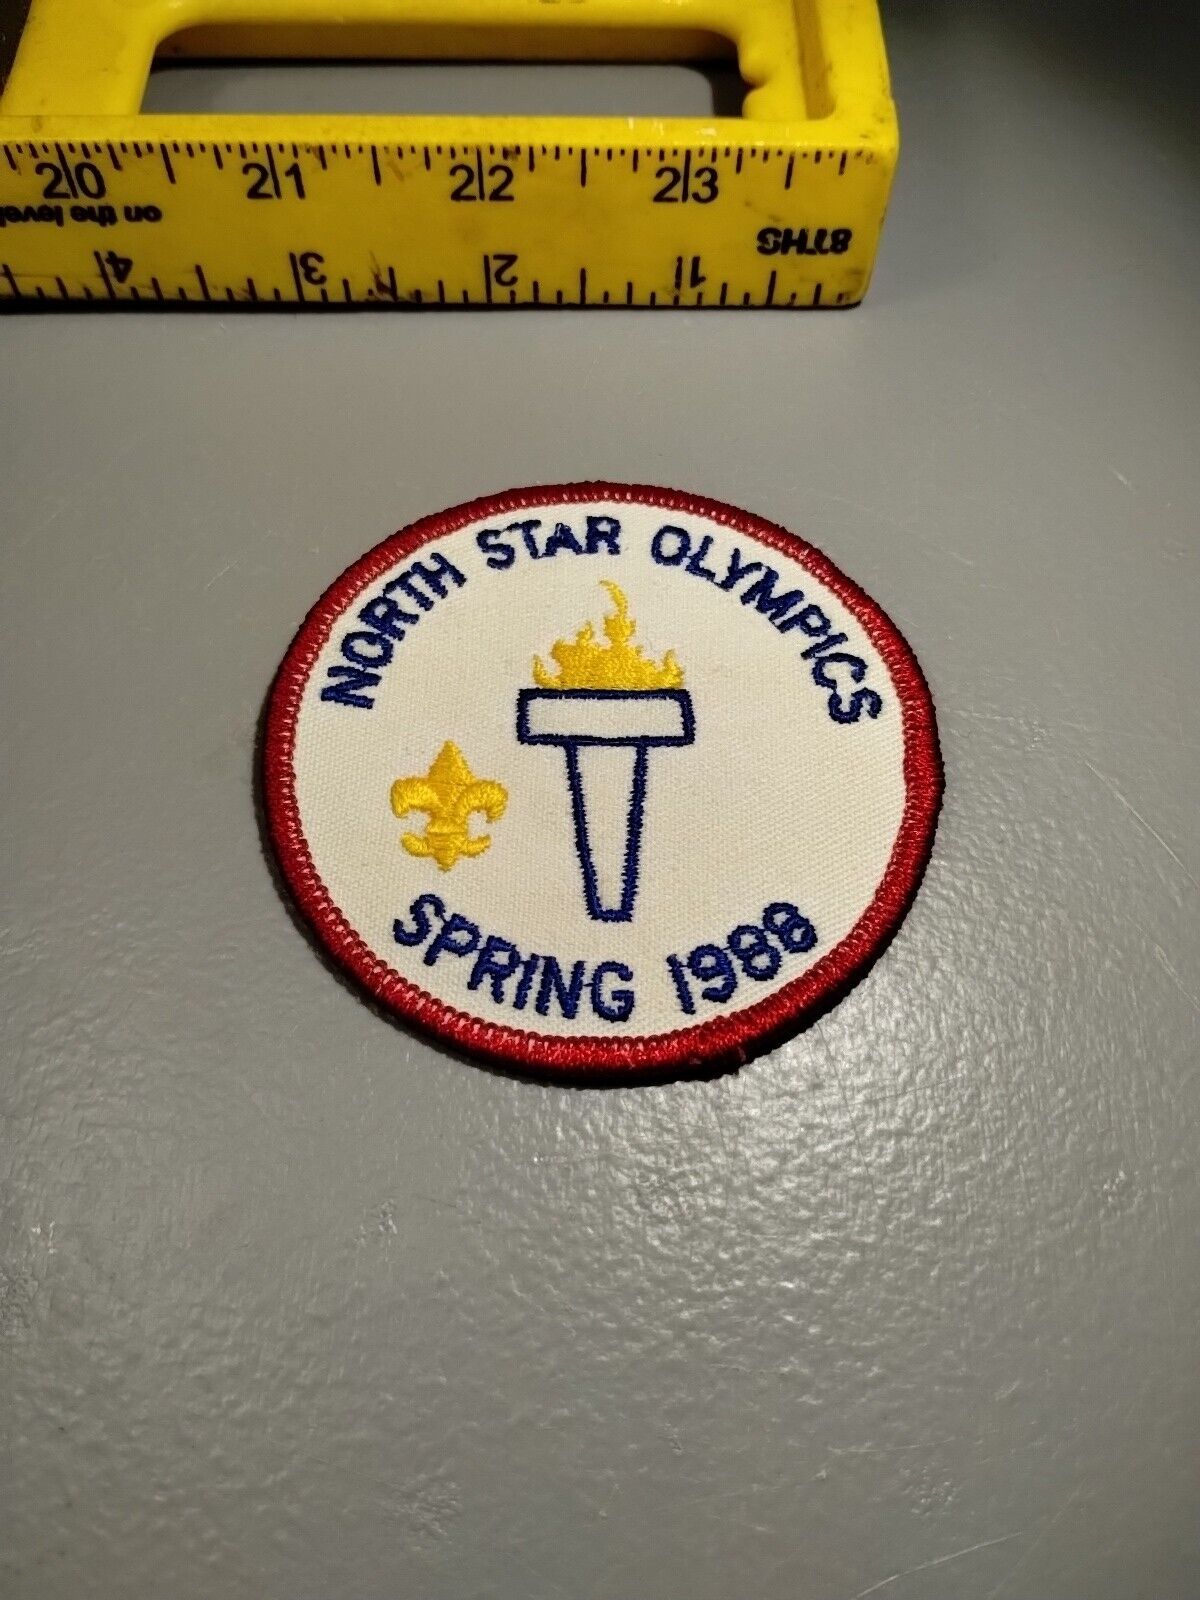 Vintage Spring 1988 North Star Olympics Patch VG+ (A4)